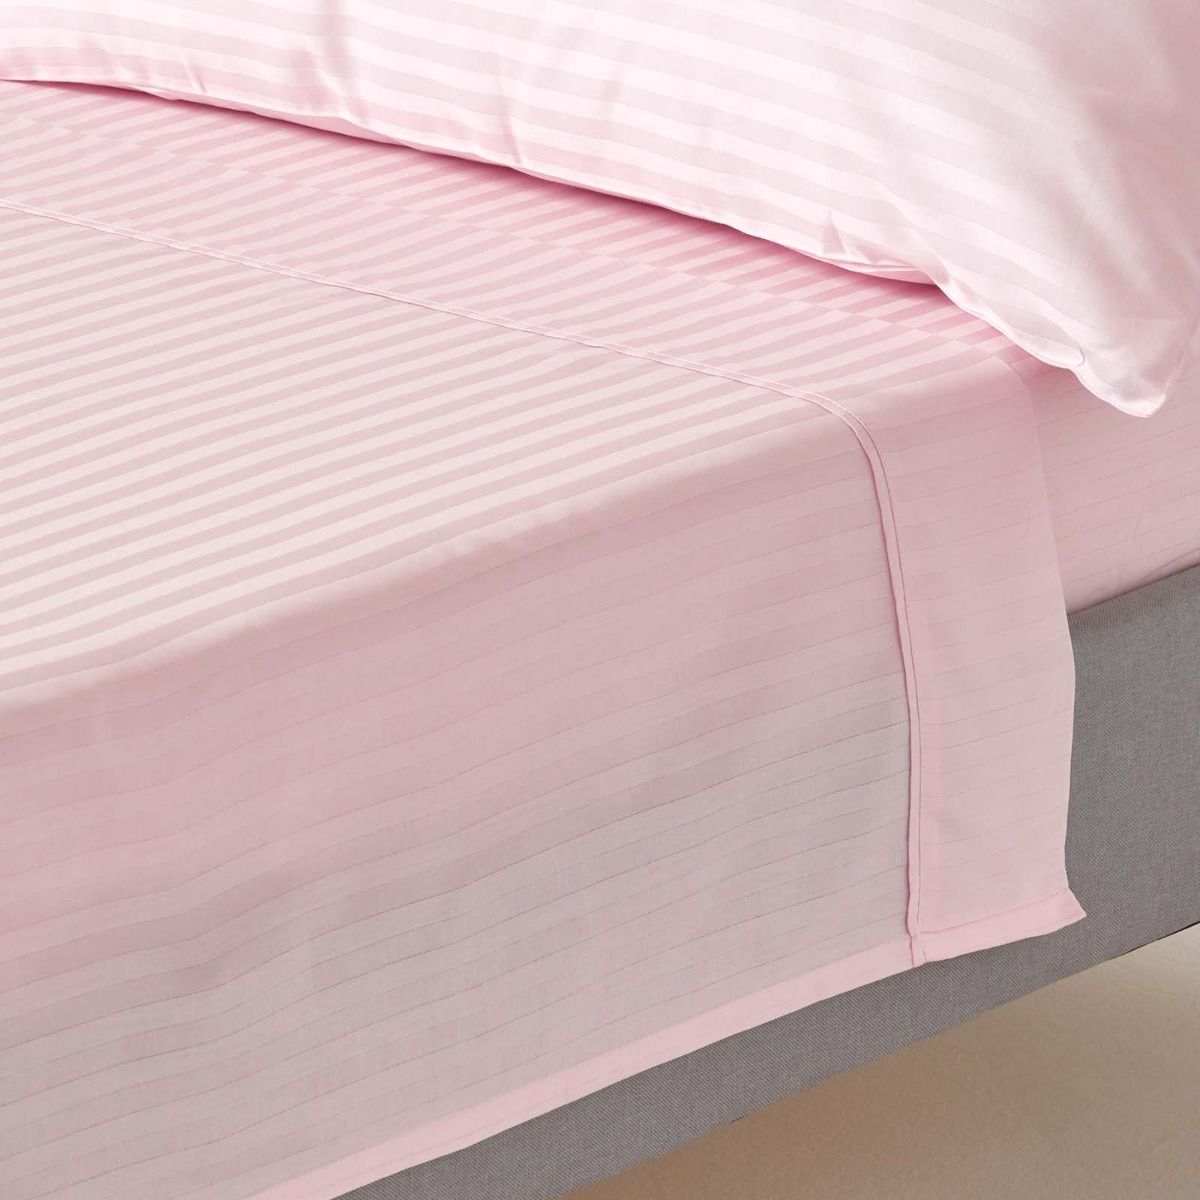 DOUBLE SIZE SleepyNights EGYPTIAN COTTON HOTEL QUALITY VALANCE SHEET PINK